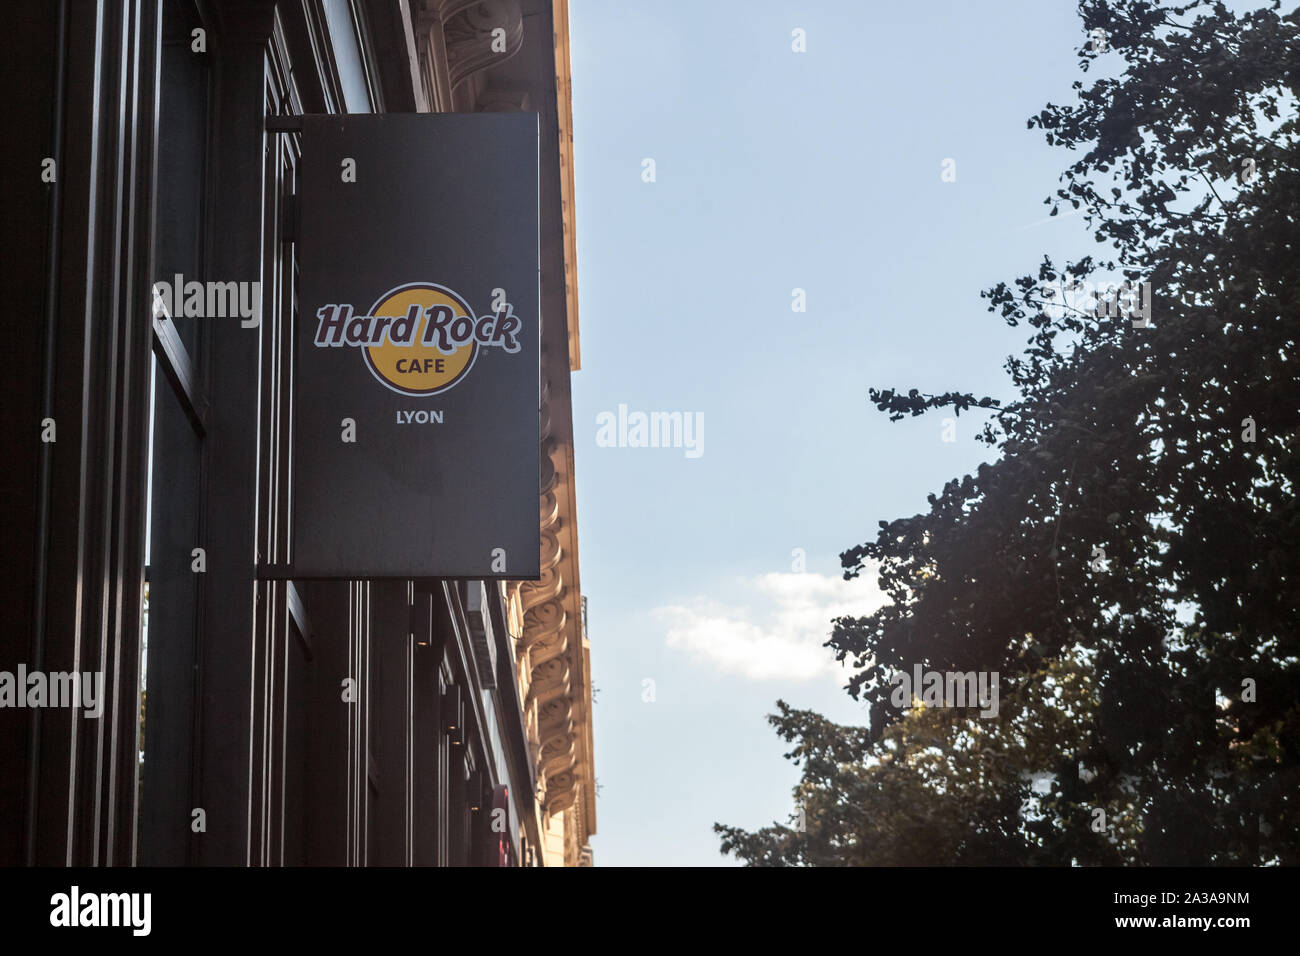 LYON, FRANCE - JULY 13, 2019: Hard Rock Cafe logo on their restaurant in Lyon. Hard Rock Cafe is a chain of American music theme restaurants spread wo Stock Photo